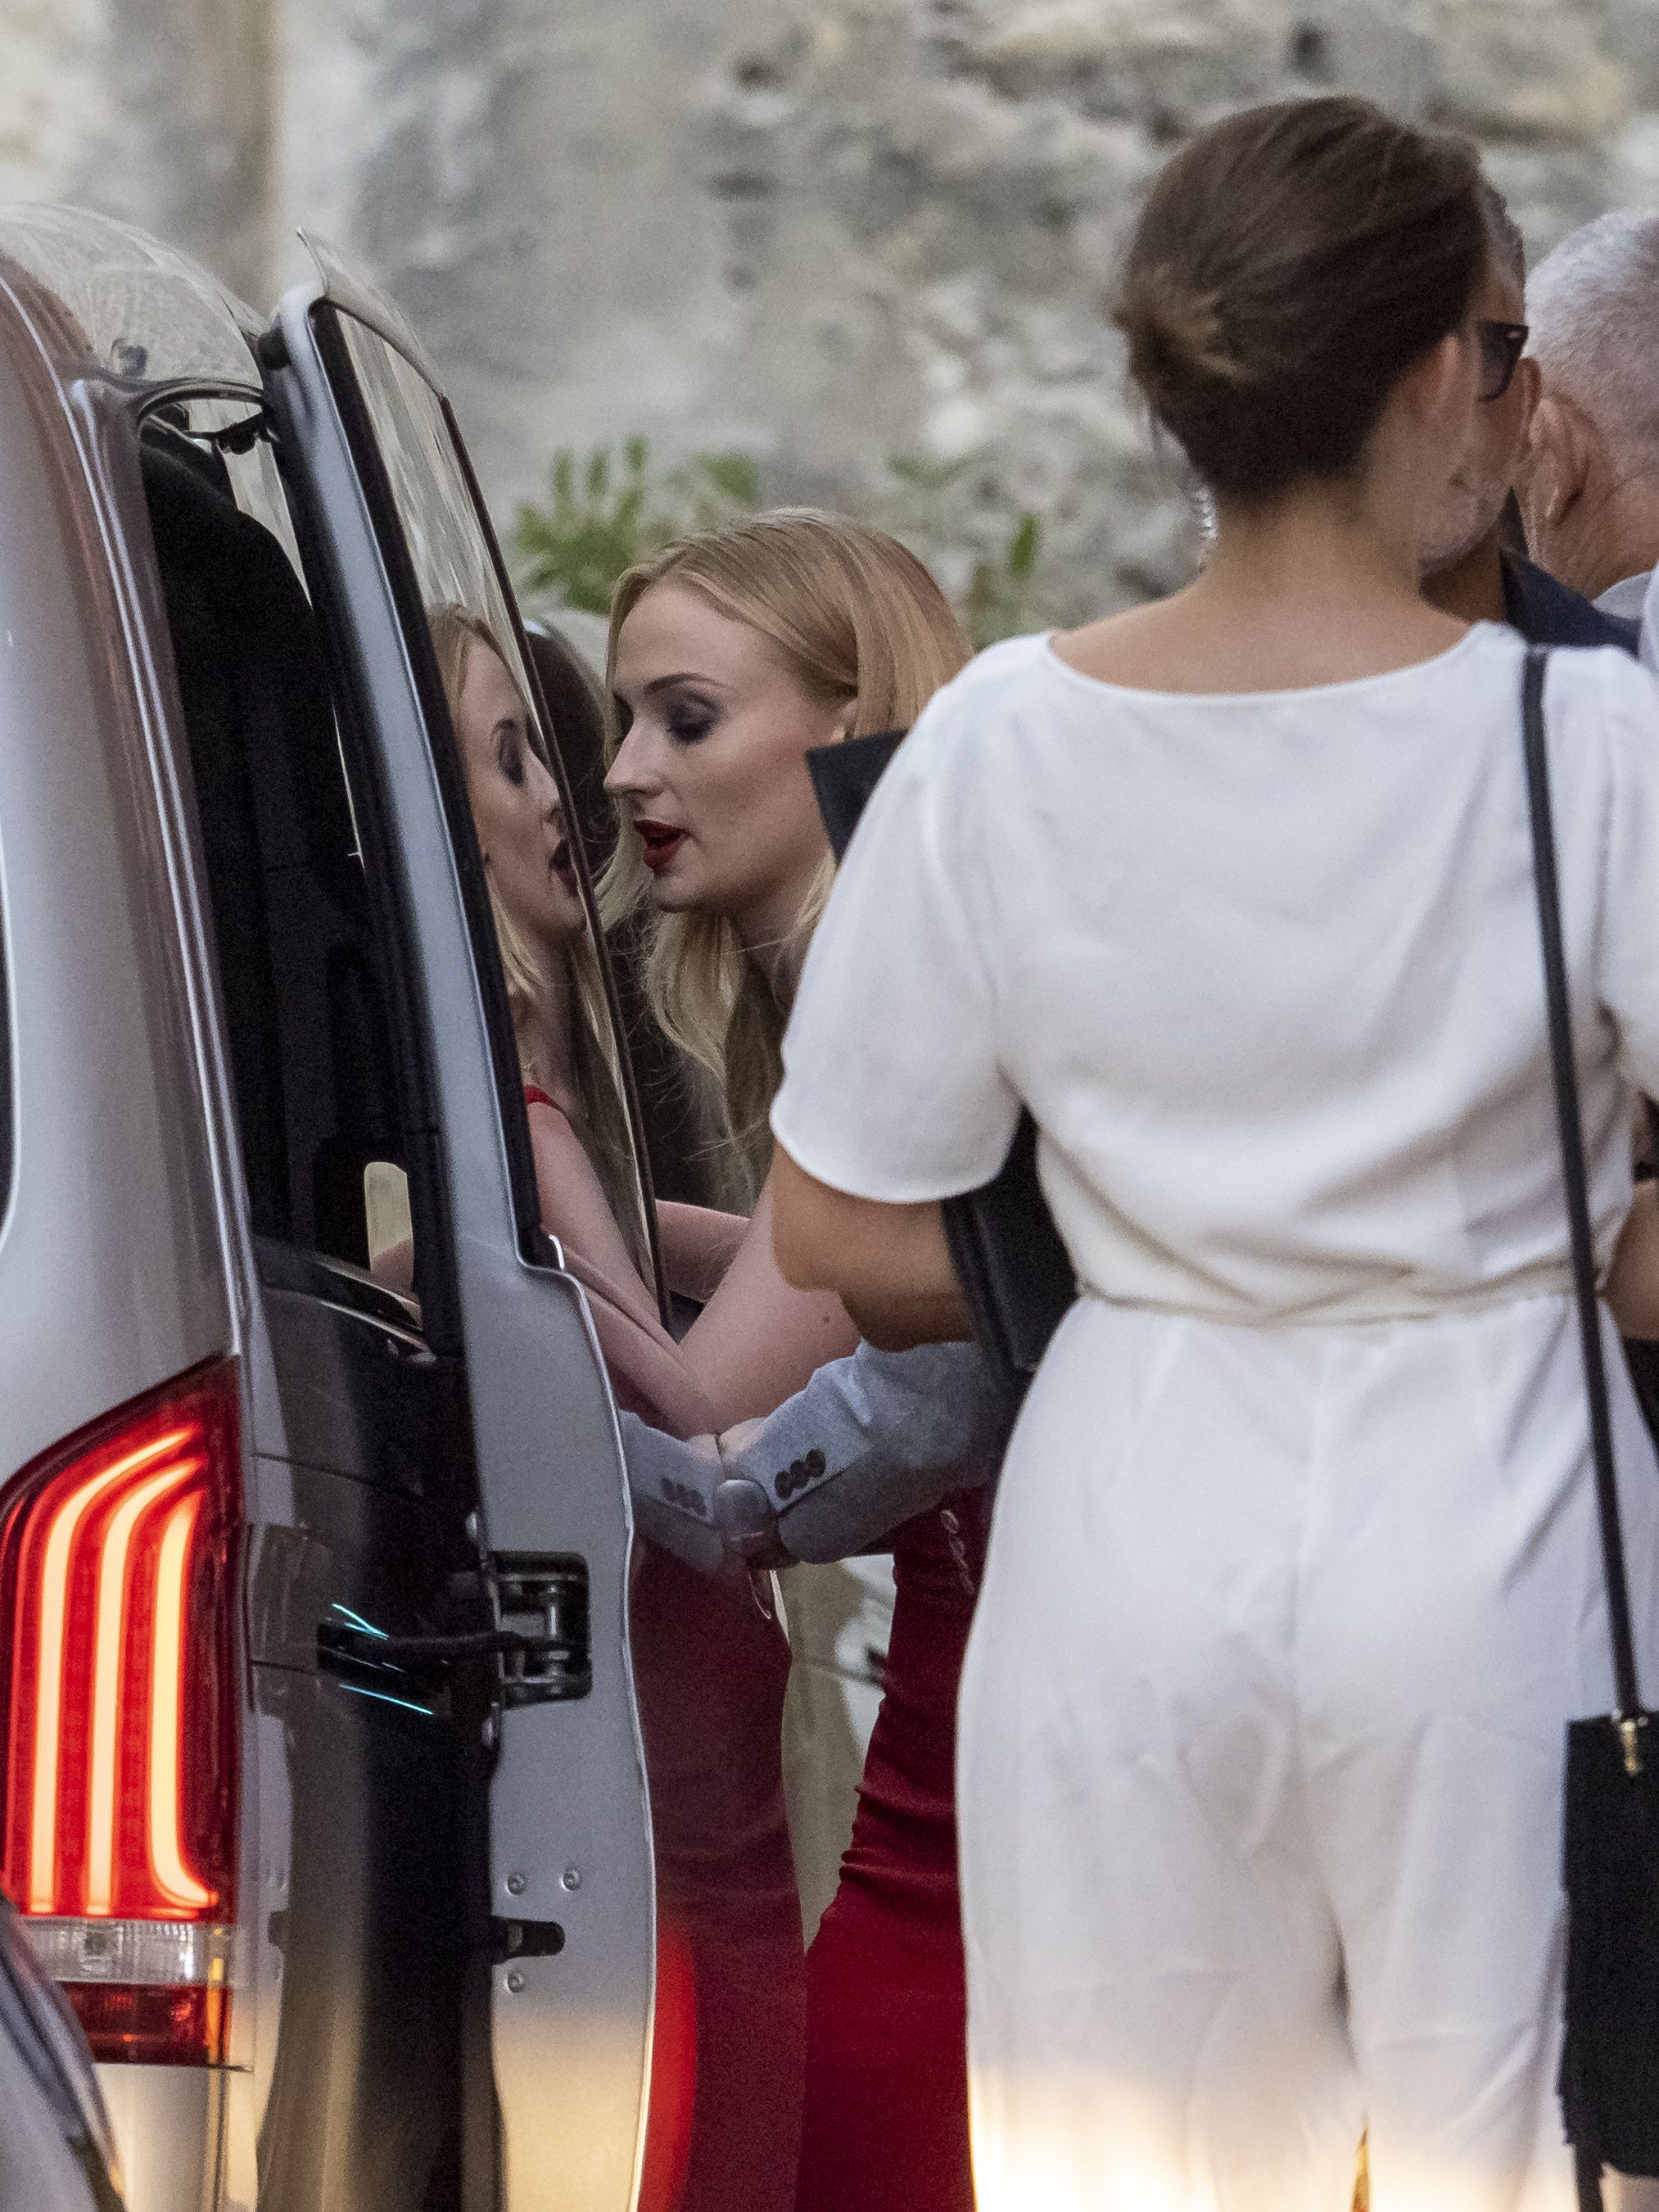 writhing-ant322: Sophie Turner in vintage bridal gown with flowers.